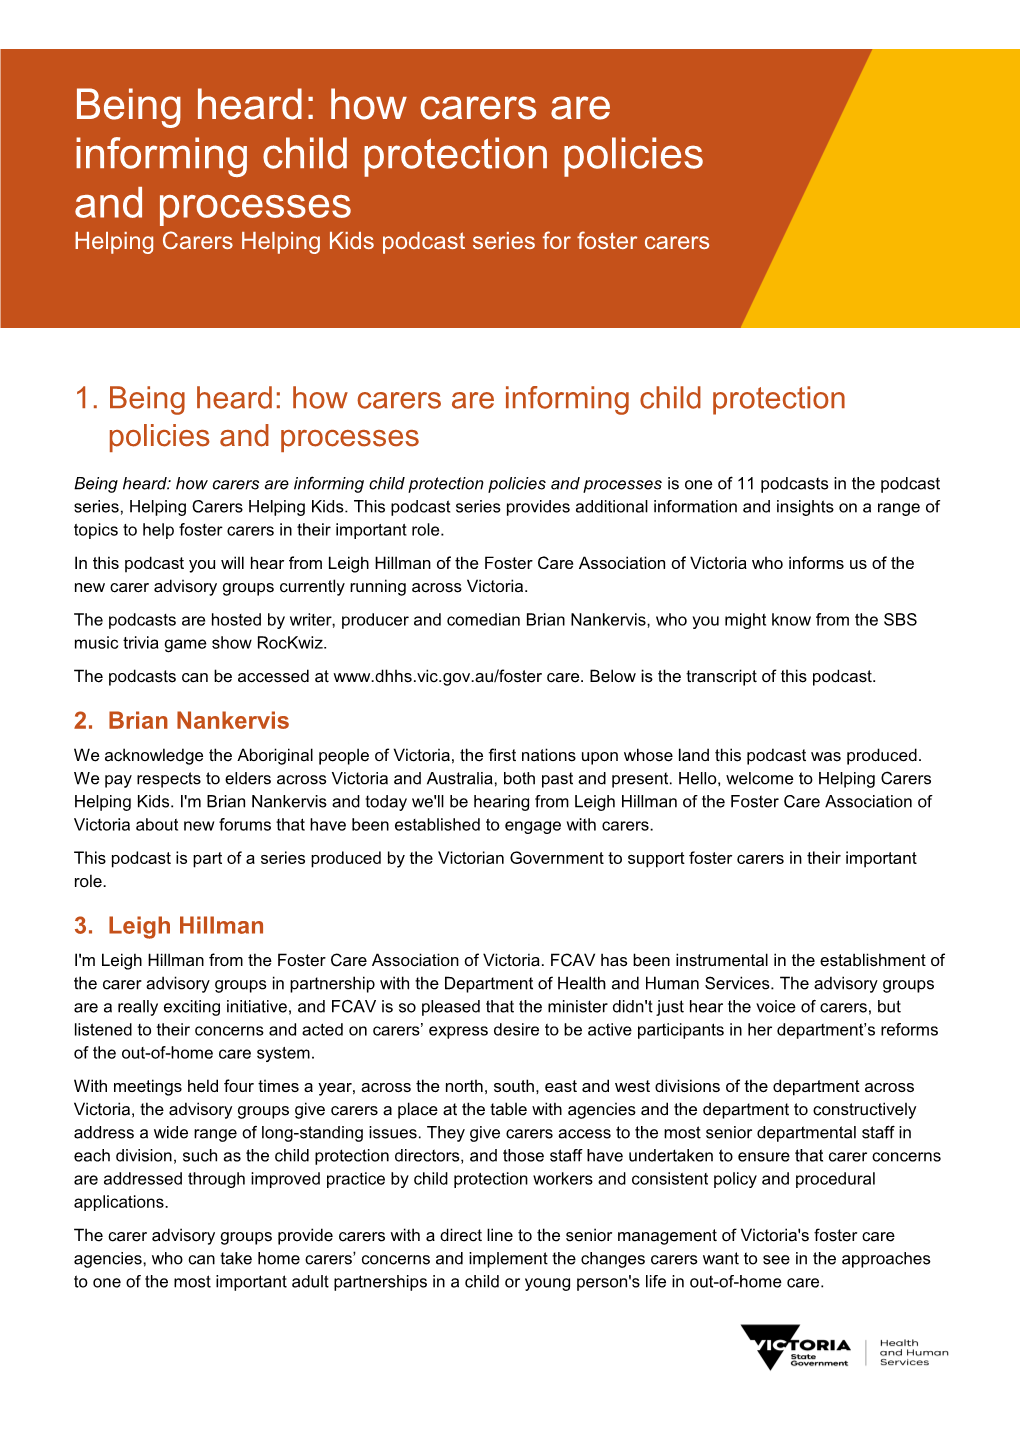 Being Heard: How Carers Are Informing Child Protection Policies and Processes - Helping